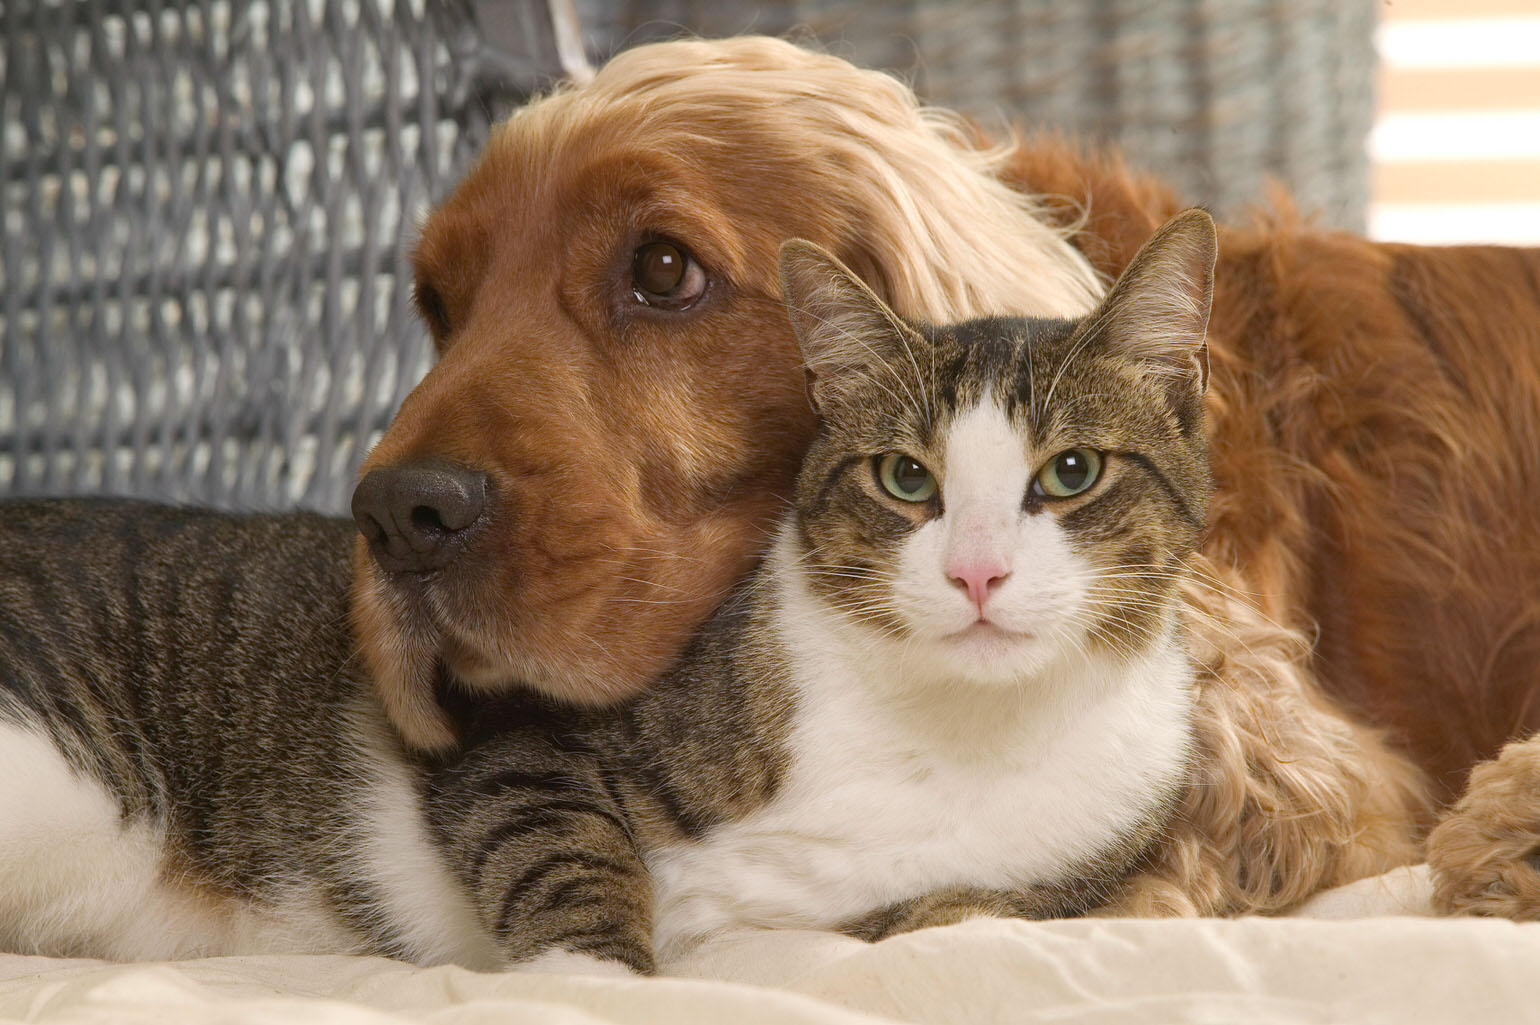 A dog and cat lay with faces touching next to each other.